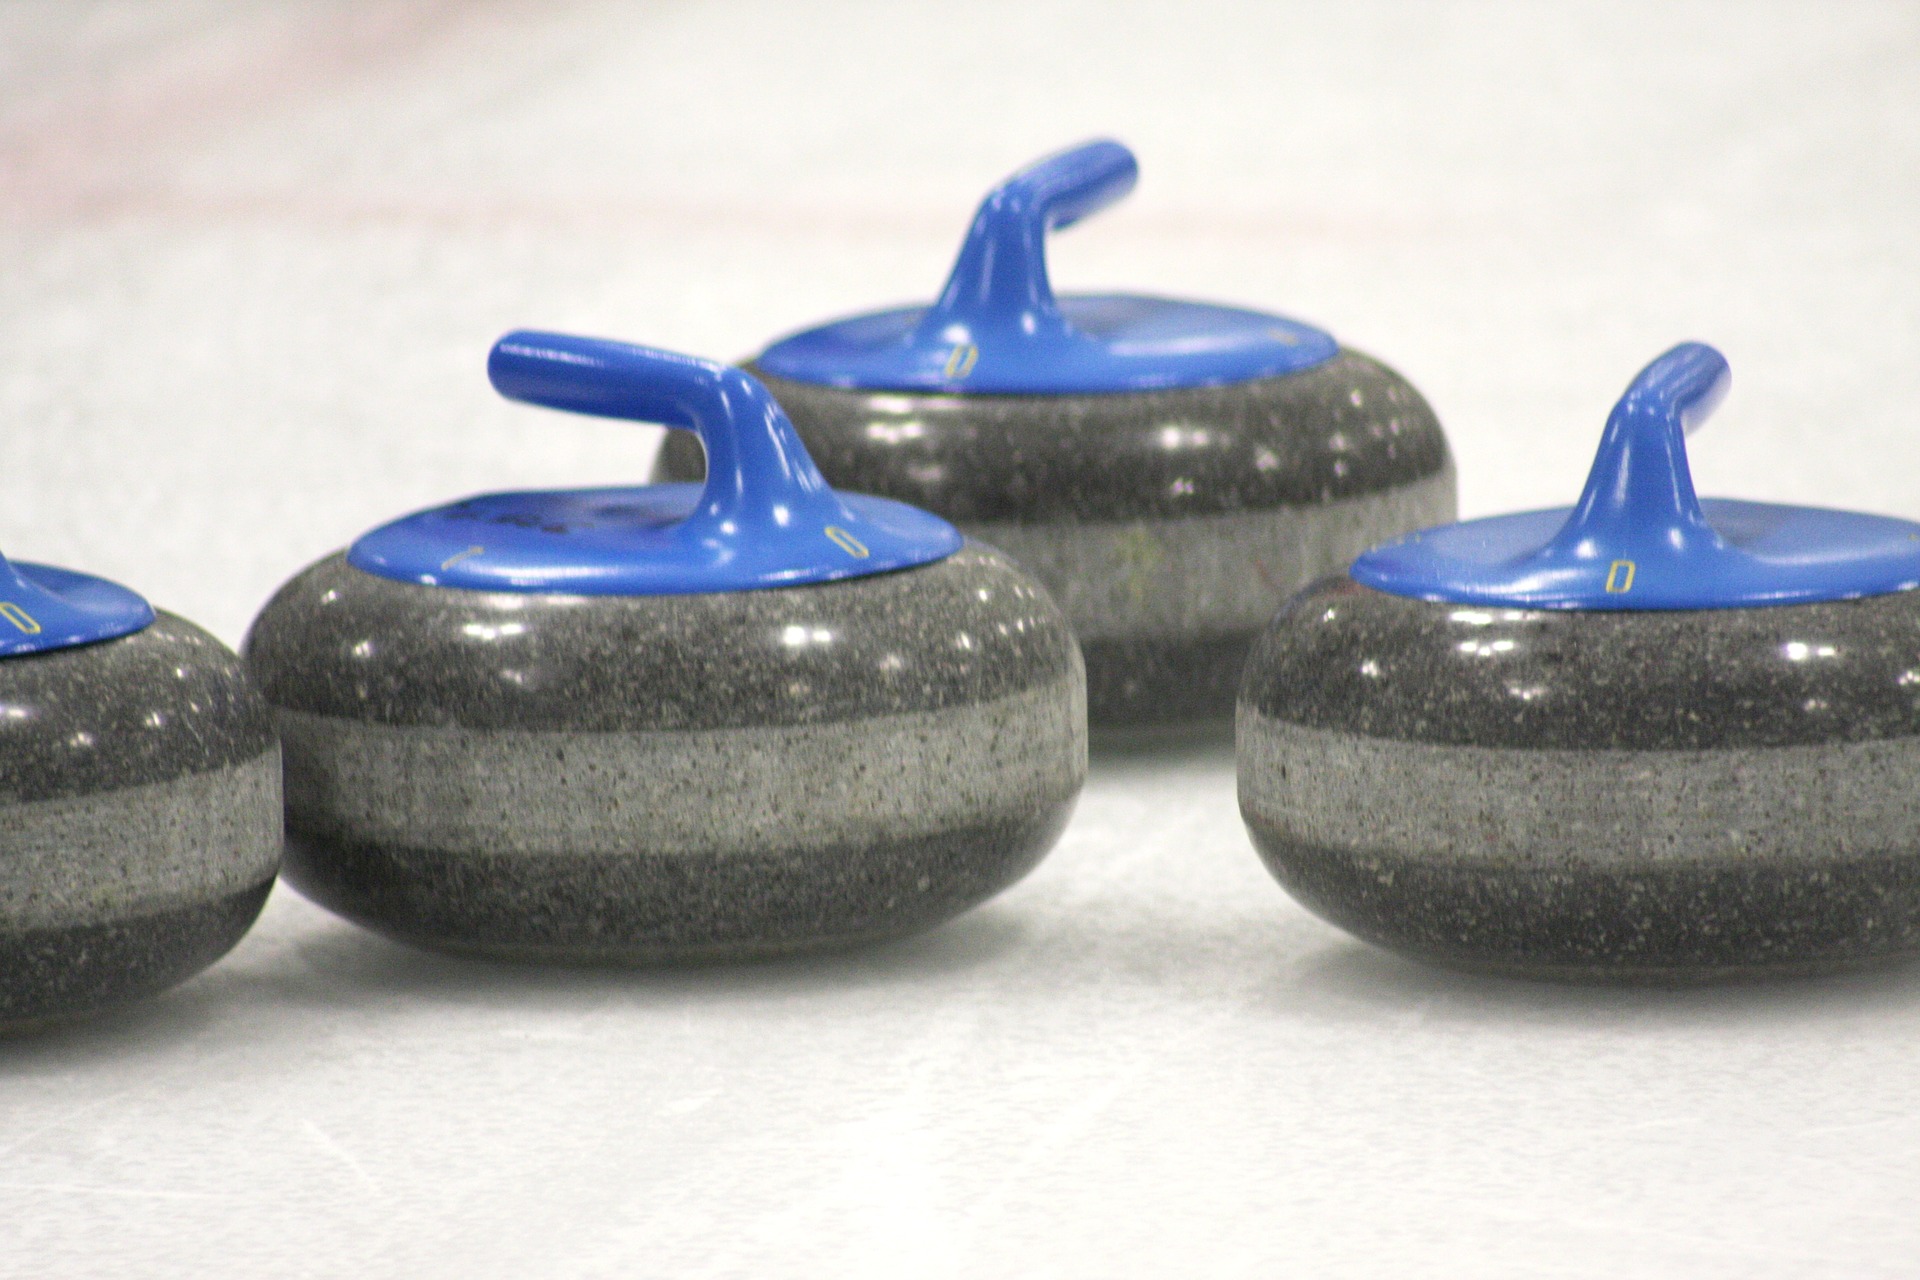 Highland Curling Club and Dr. JH Gillis Regional High to host Nova Scotia Northumberland Mixed Curling Championship